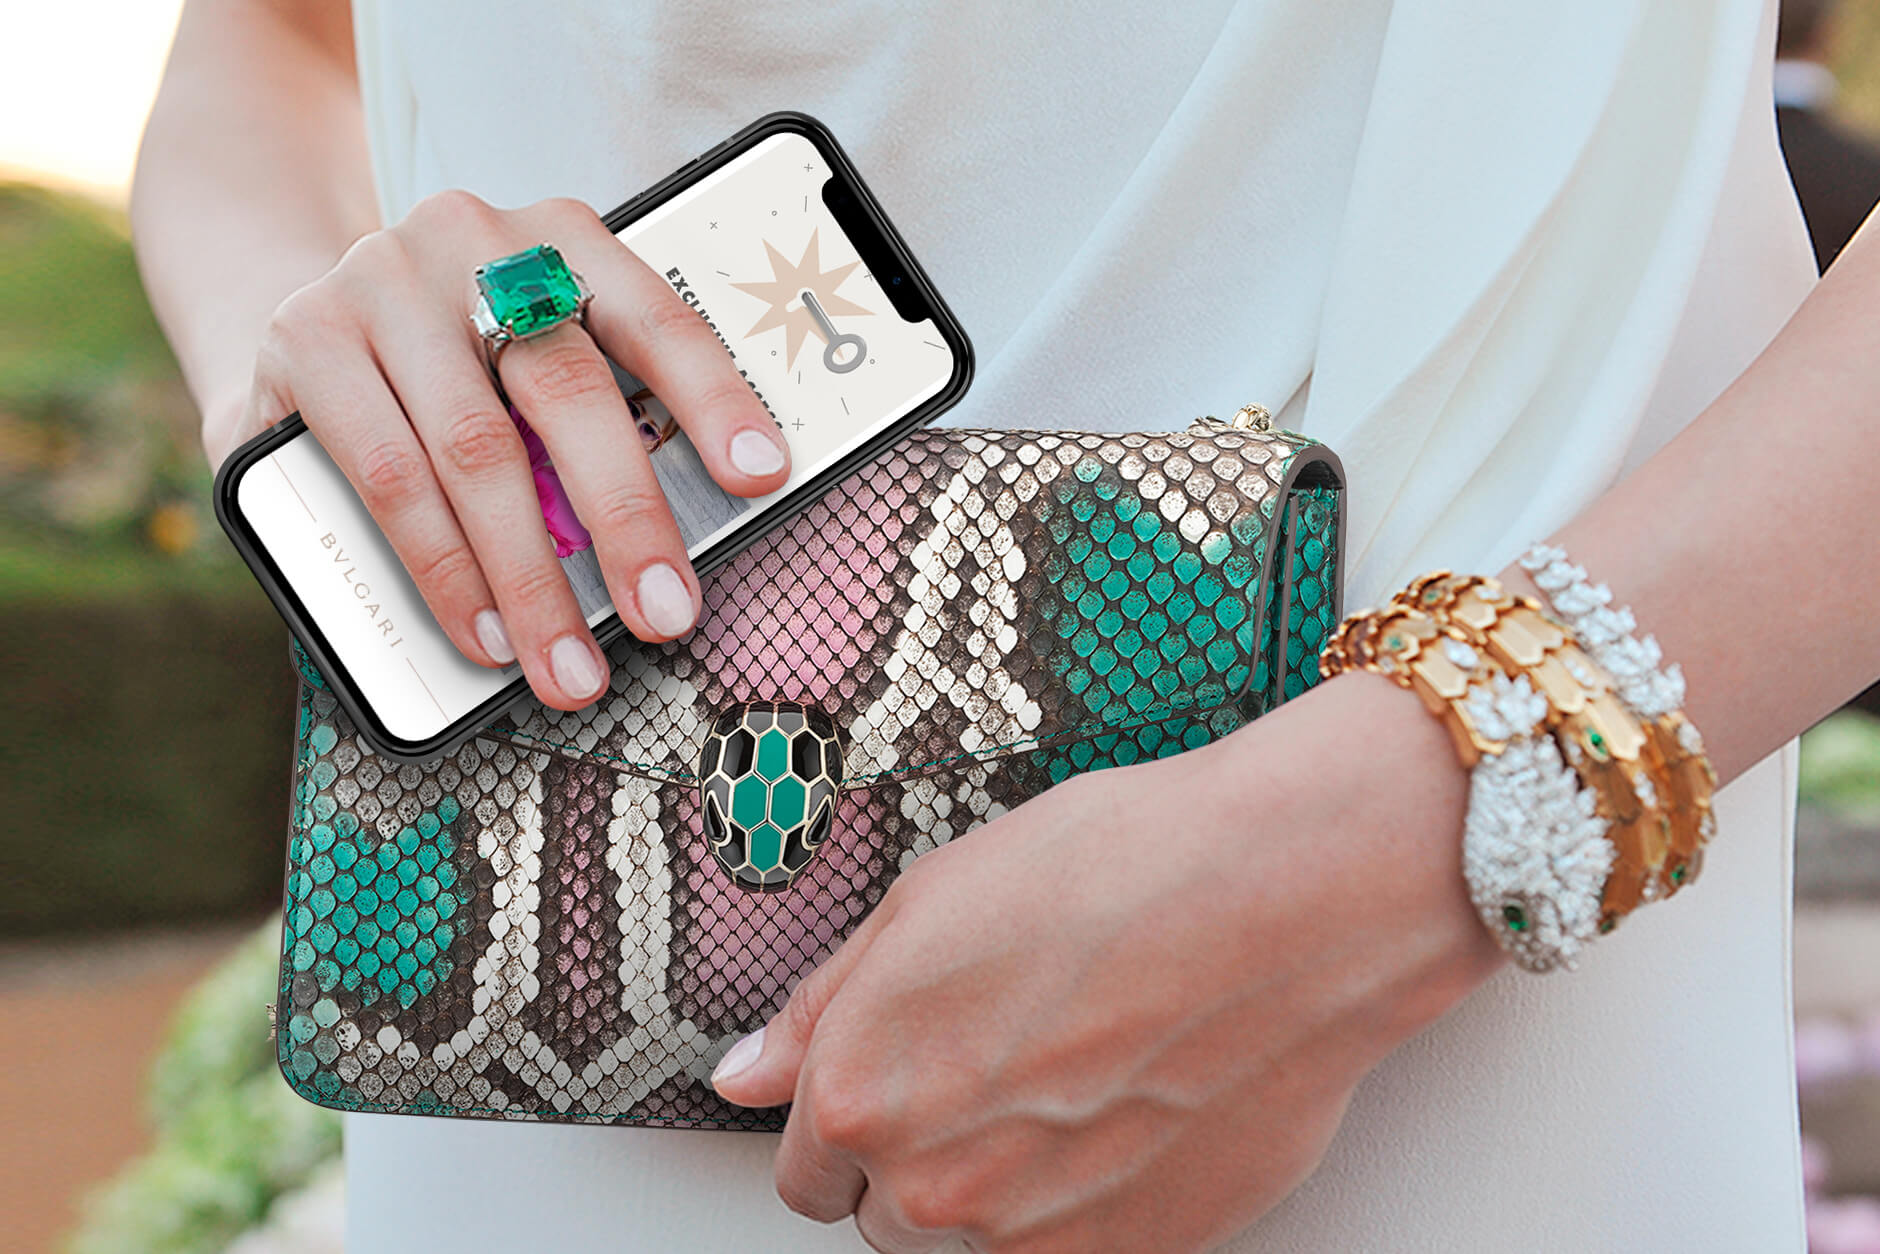 Fashion brands evolve NFC tag strategies to provide more value, exclusivity  - Glossy